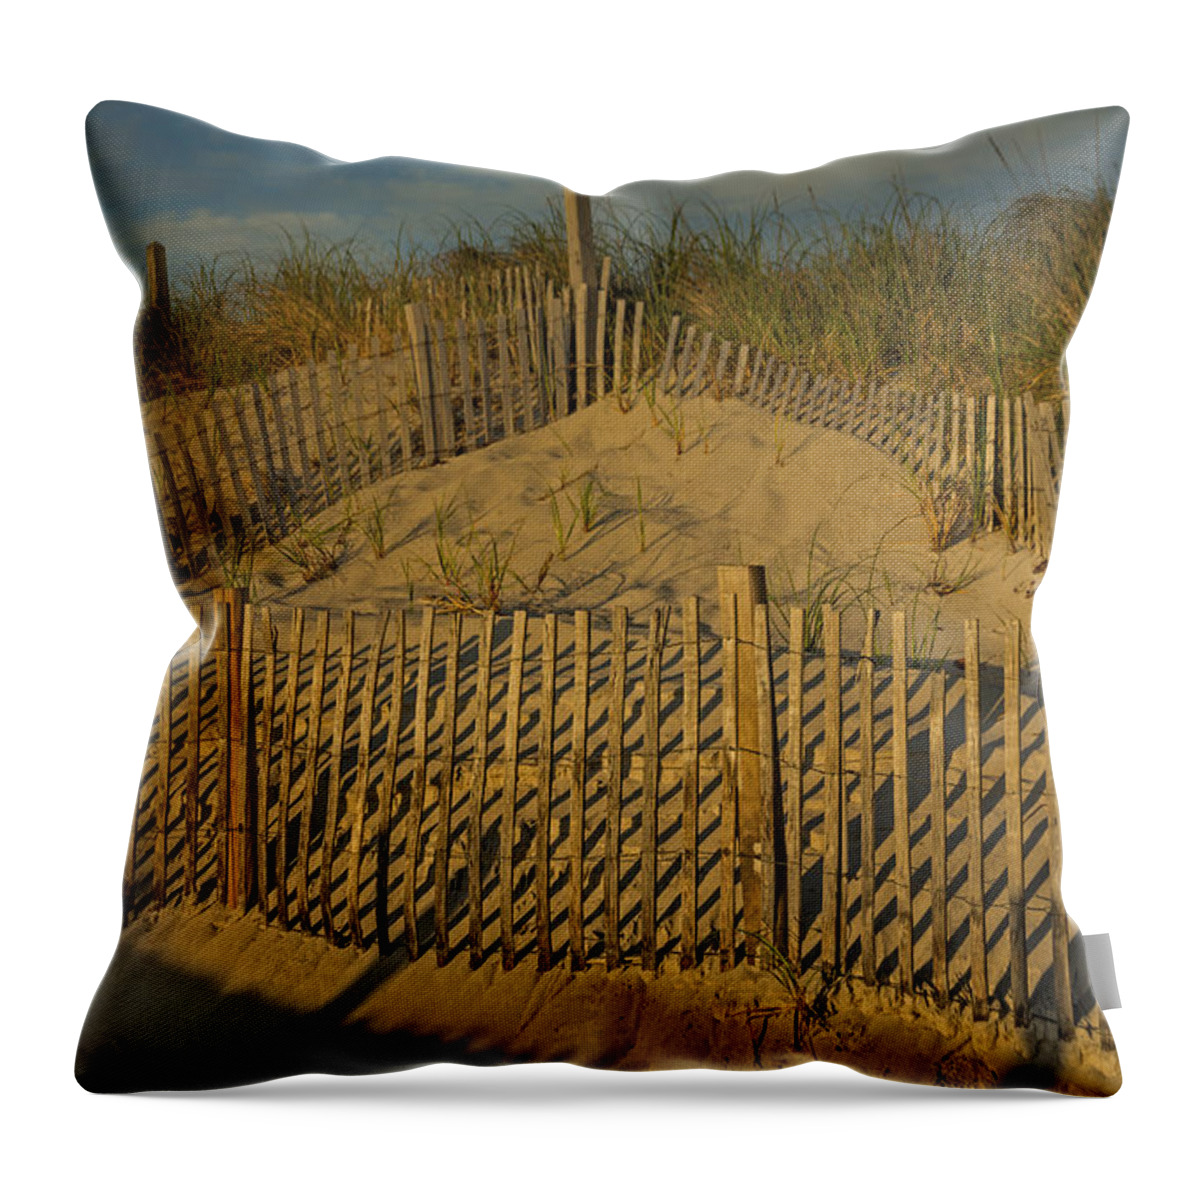 Cape Cod Throw Pillow featuring the photograph Beach Fence by Susan Candelario